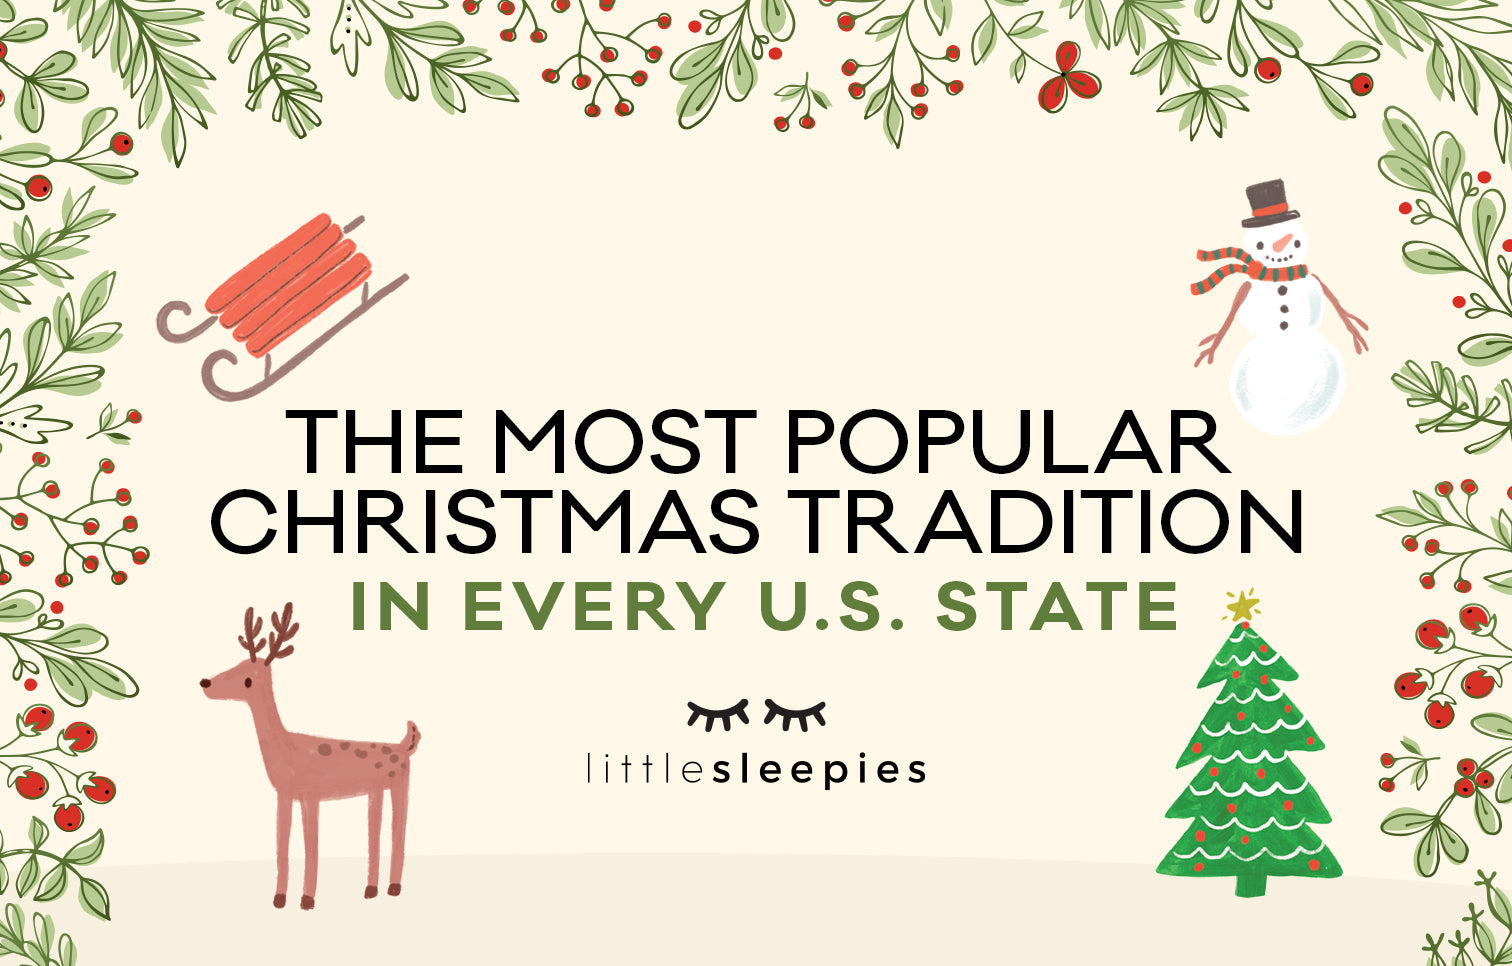 The Most Popular Christmas Traditions by State